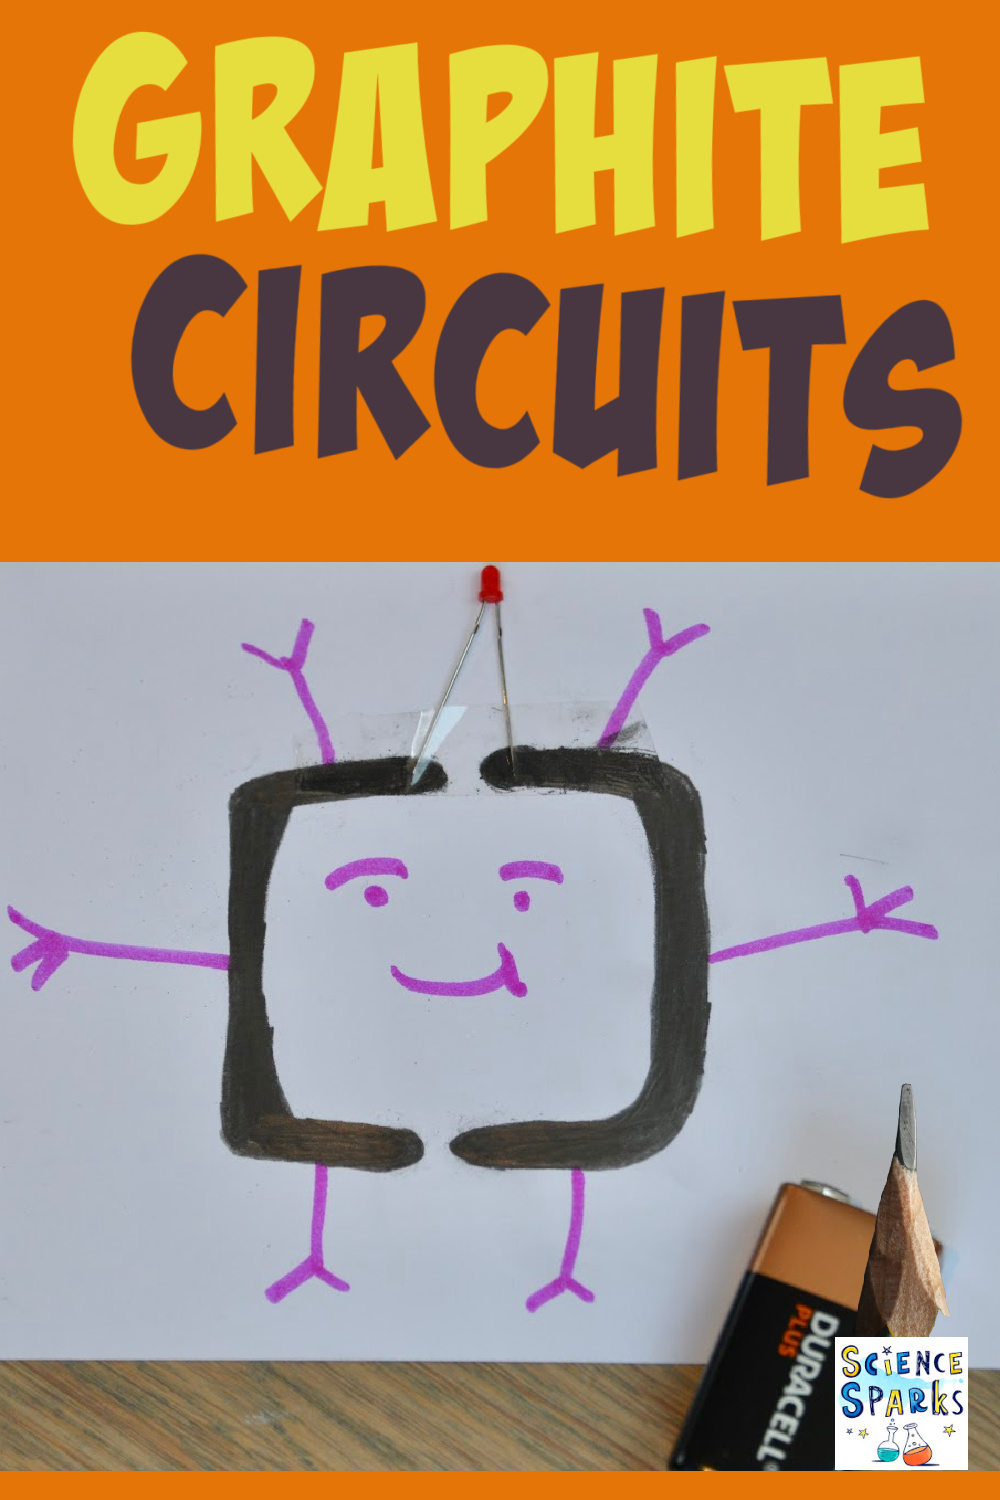 Circuit made using a graphite pencil, battery and LEF